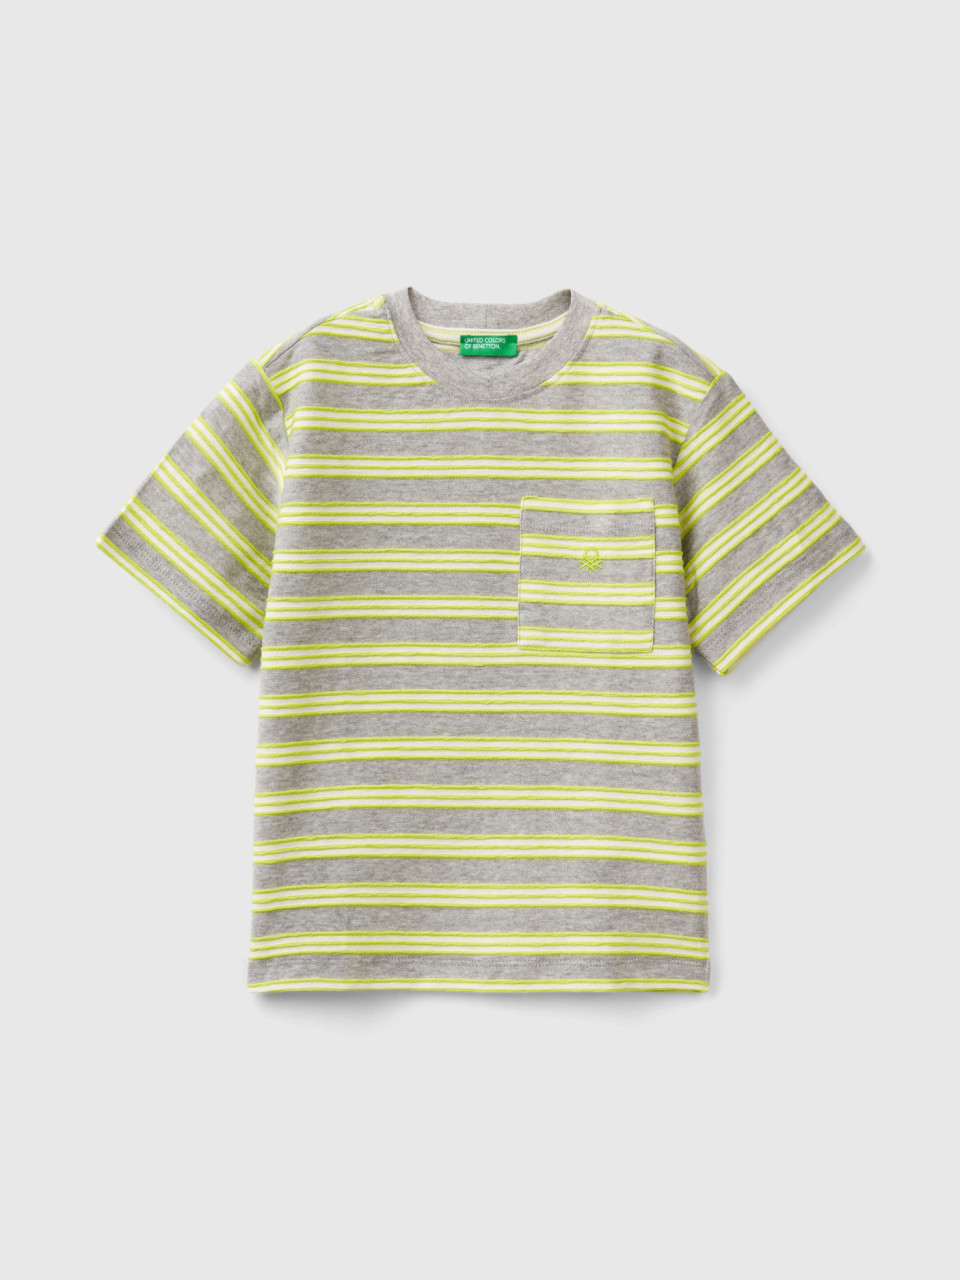 Benetton, Striped T-shirt With Pocket, Lime, Kids